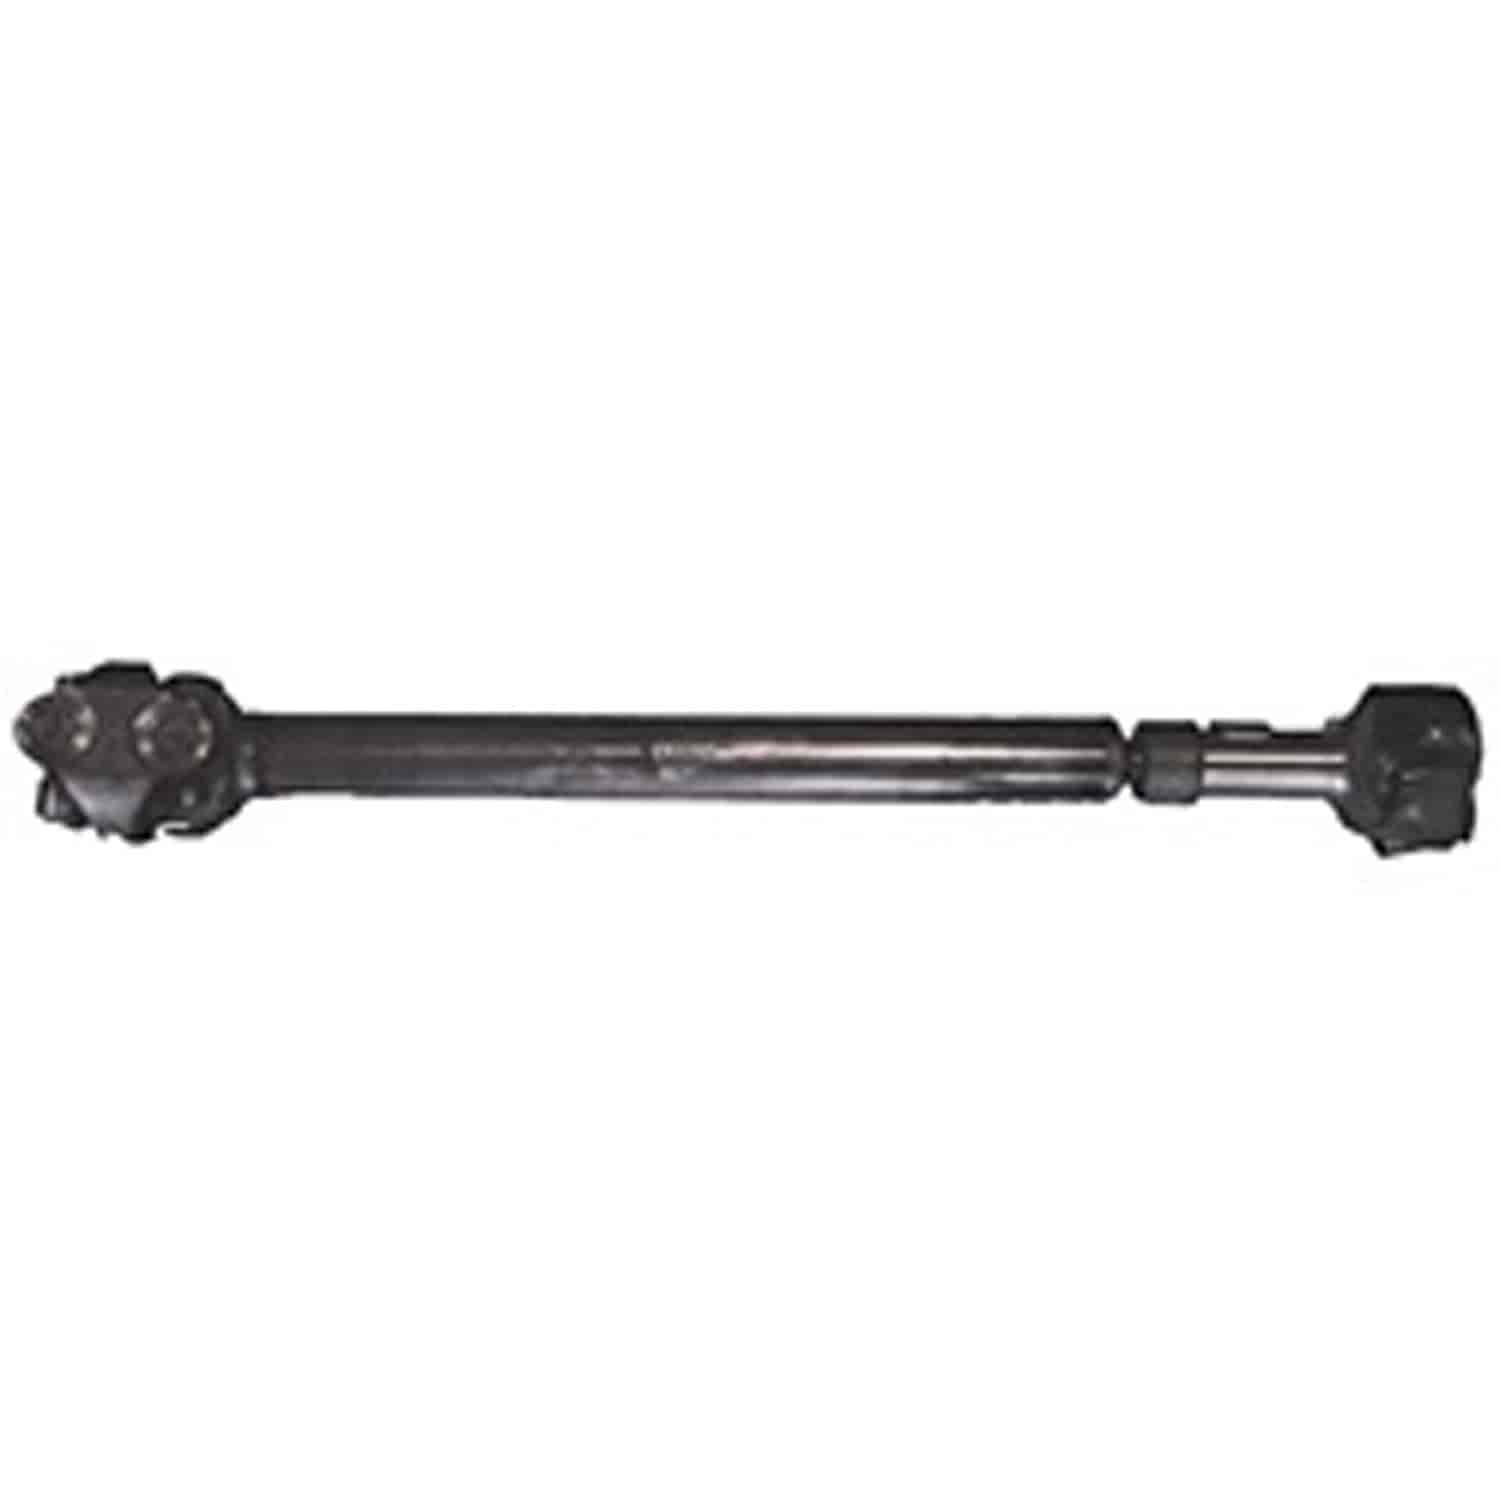 Stock replacement front driveshaft from Omix-ADA, Fits 89-00 Jeep Cherokee XJ with 4.0 liter